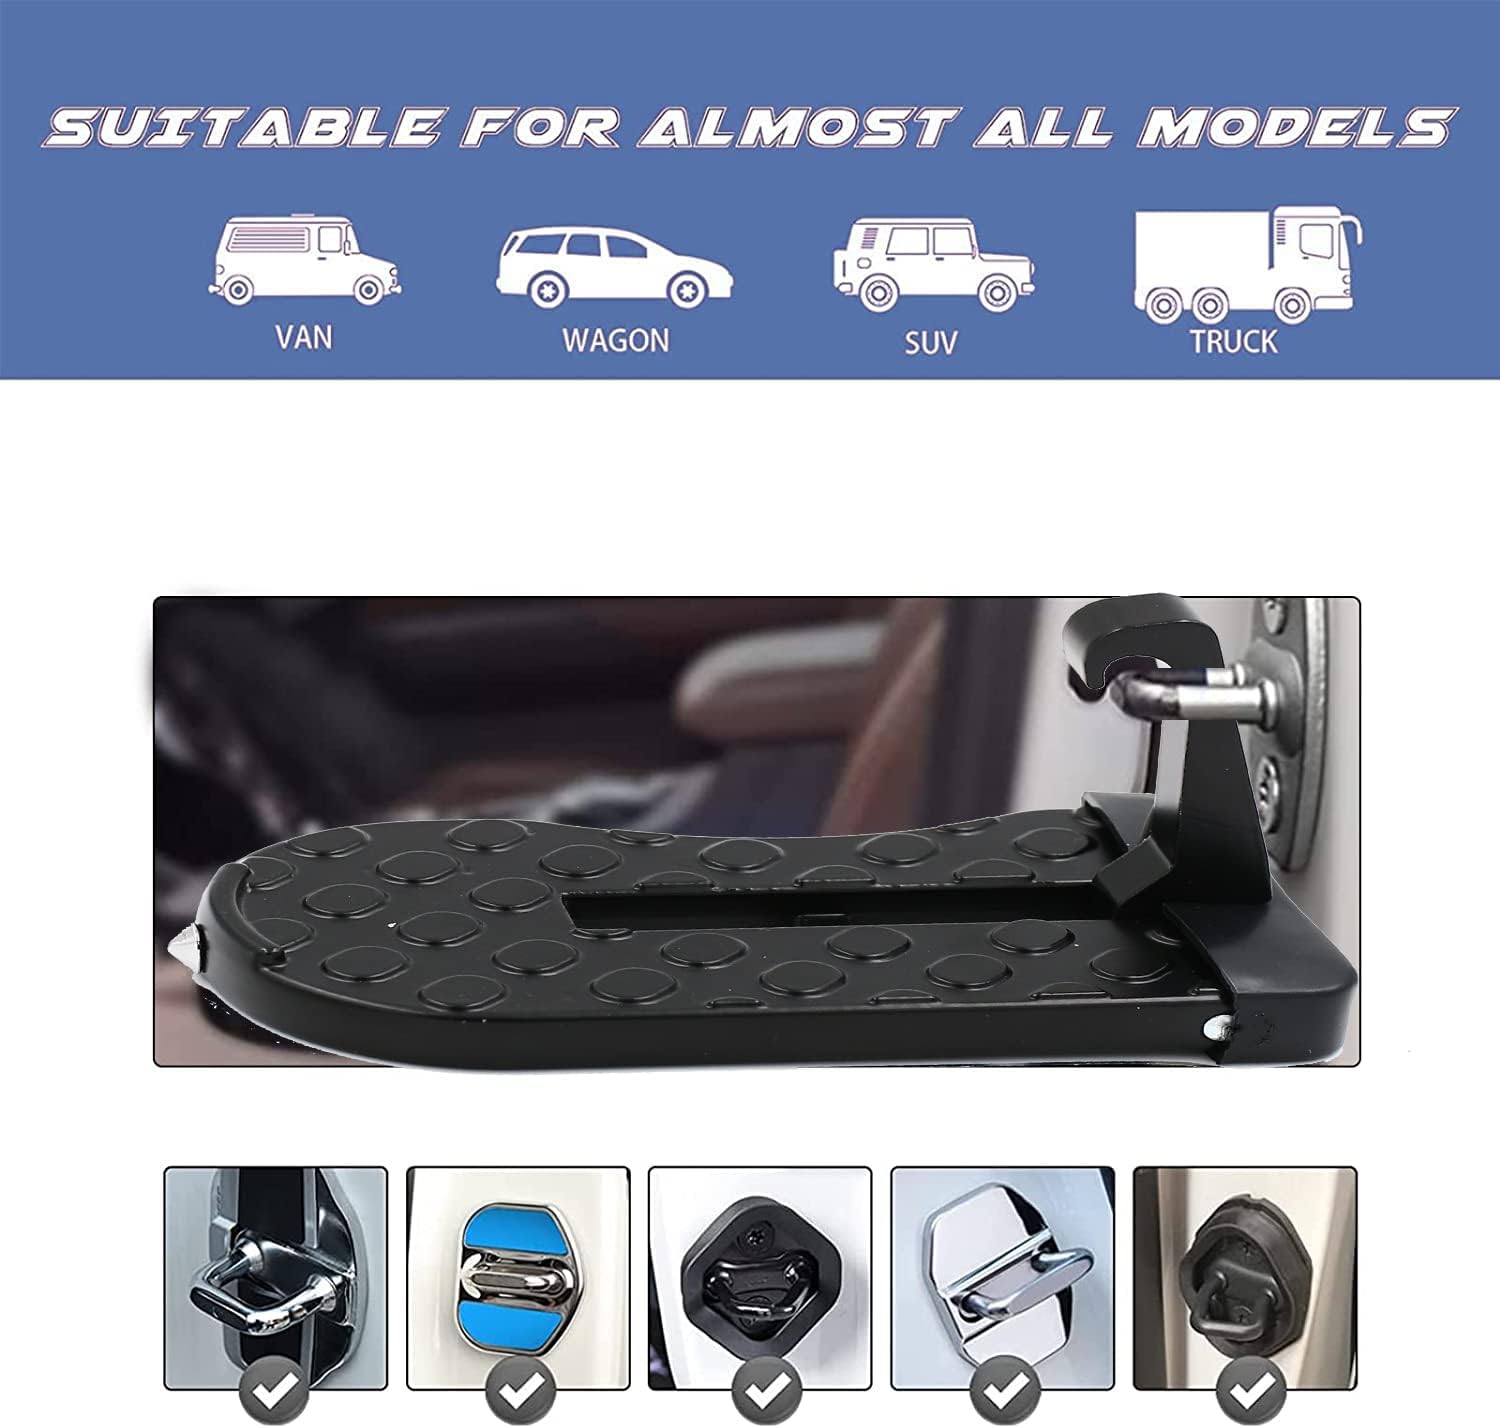  door step going up and down pedal car folding roof box rack car step car auxiliary step step‐ladder stepladder door pedal car wash goods 